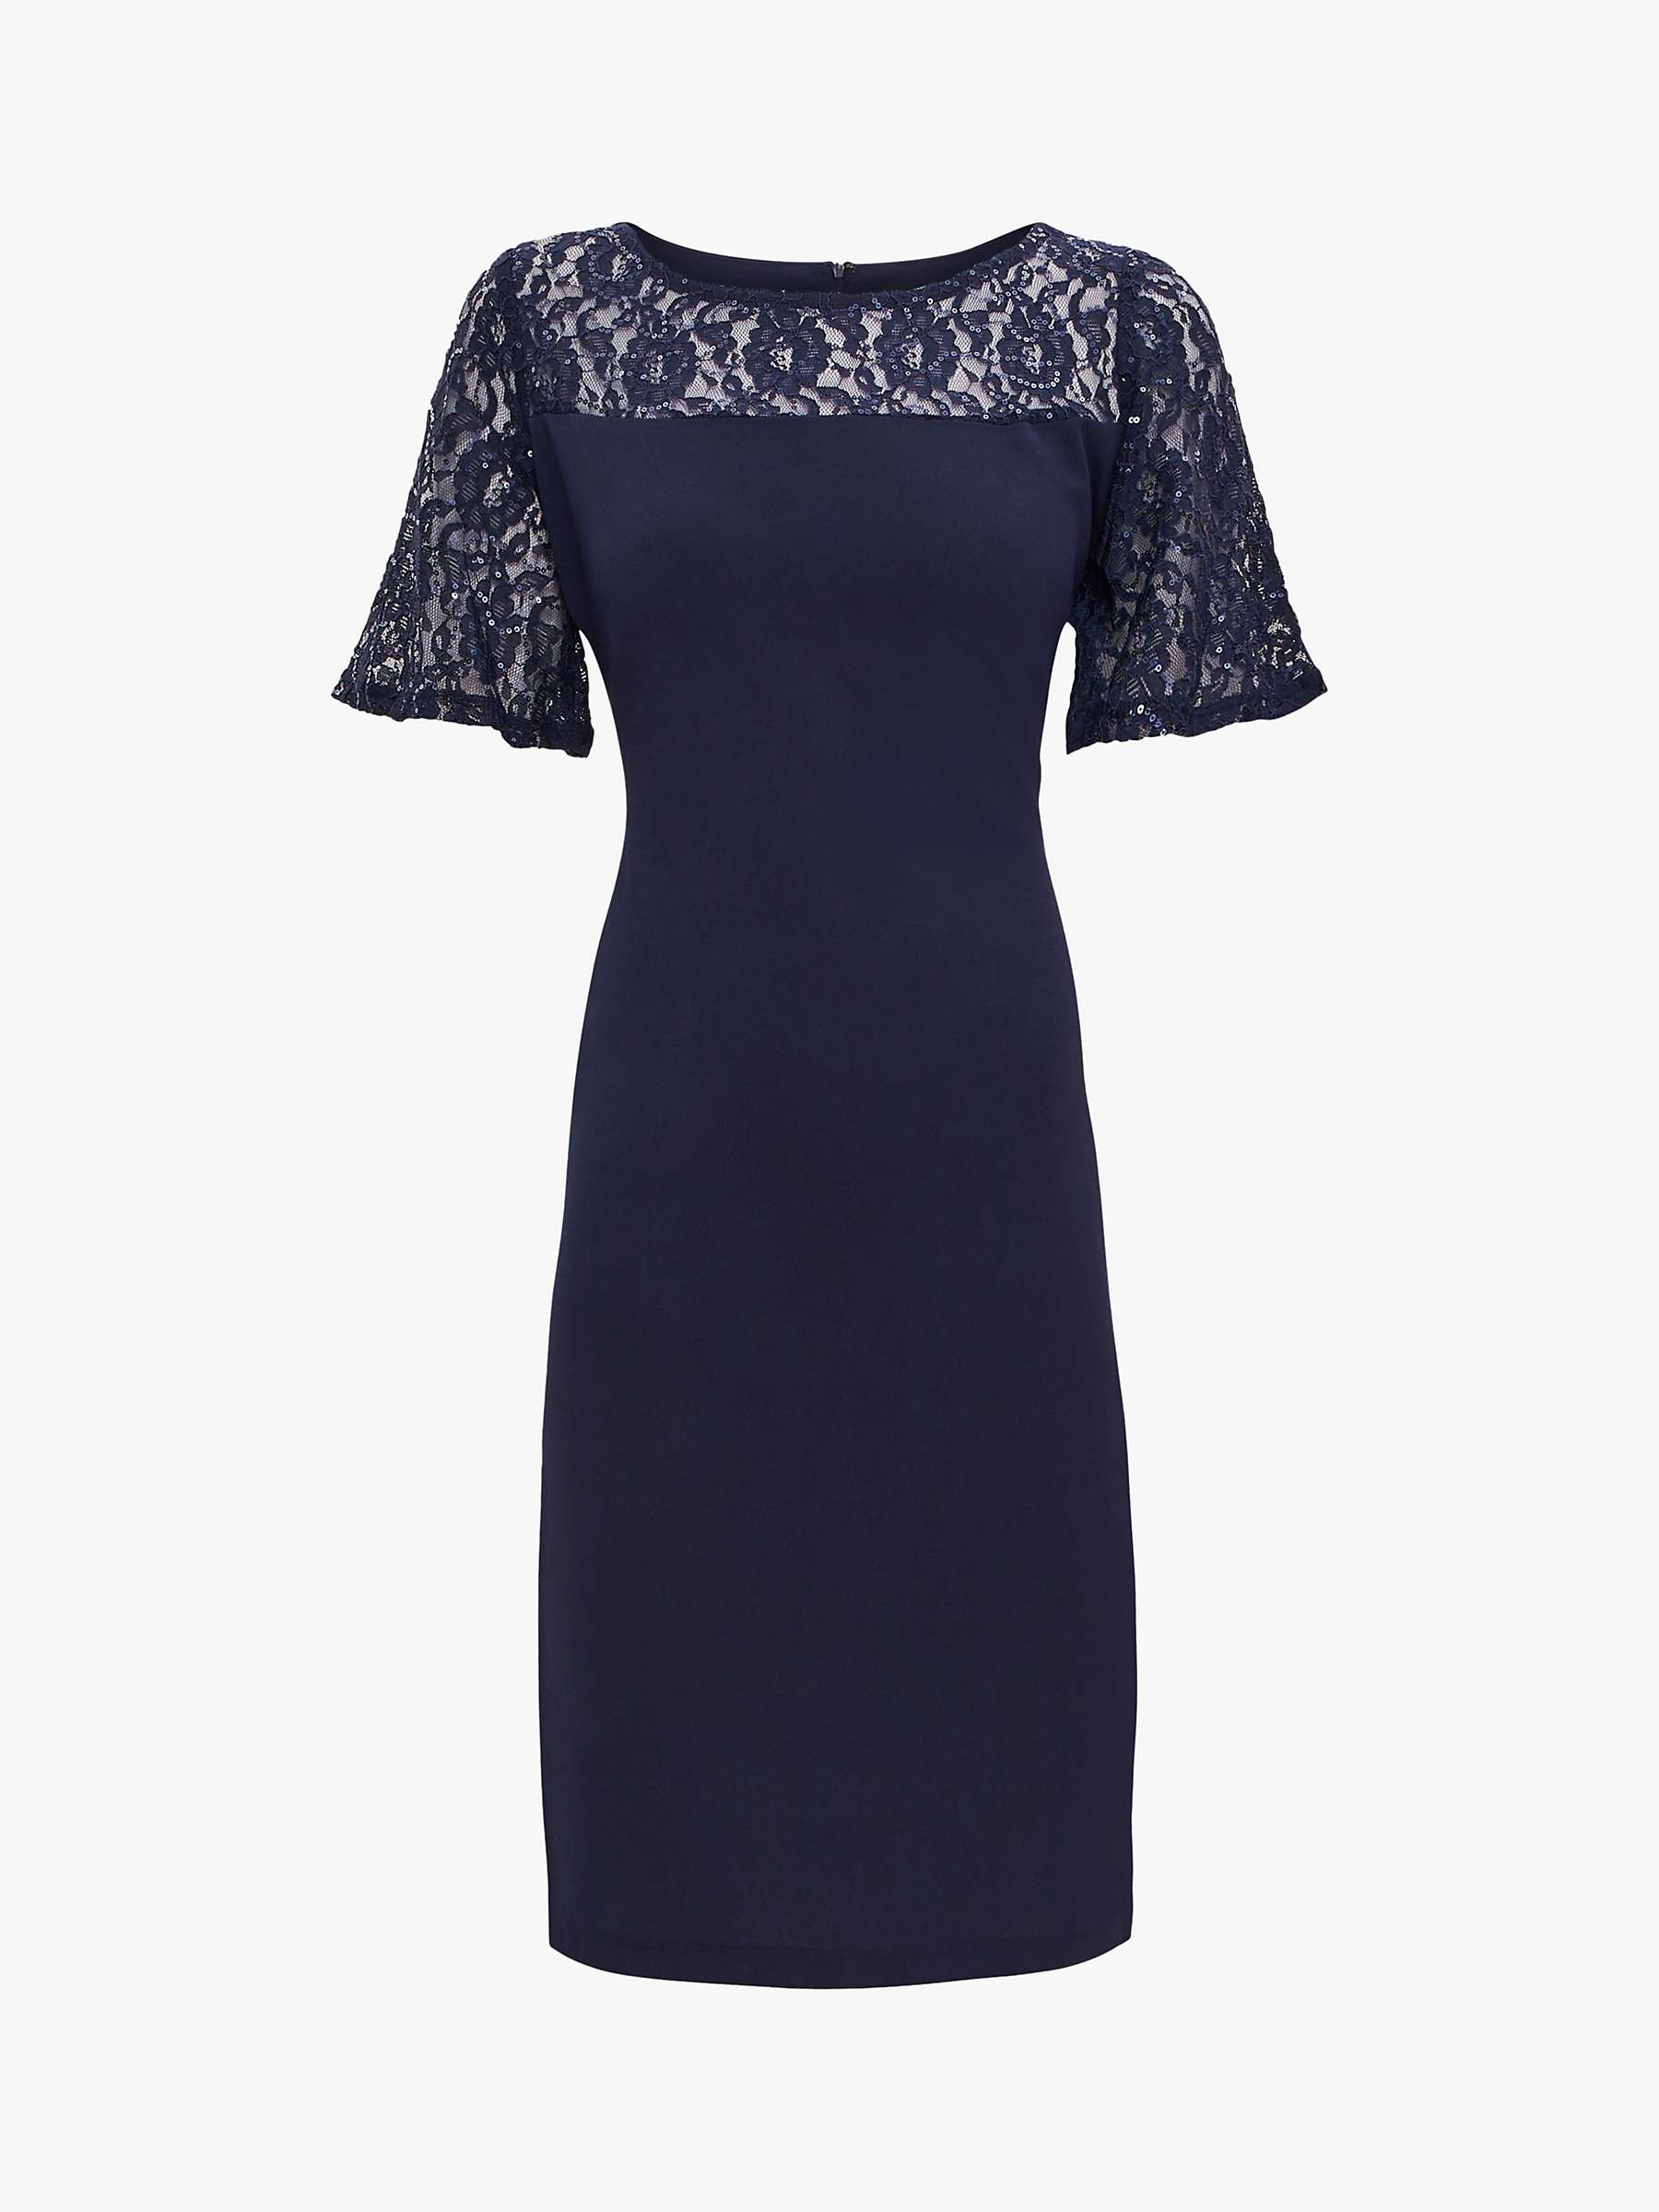 Buy Gina Bacconi Imola Lace Cocktail Dress Online at johnlewis.com